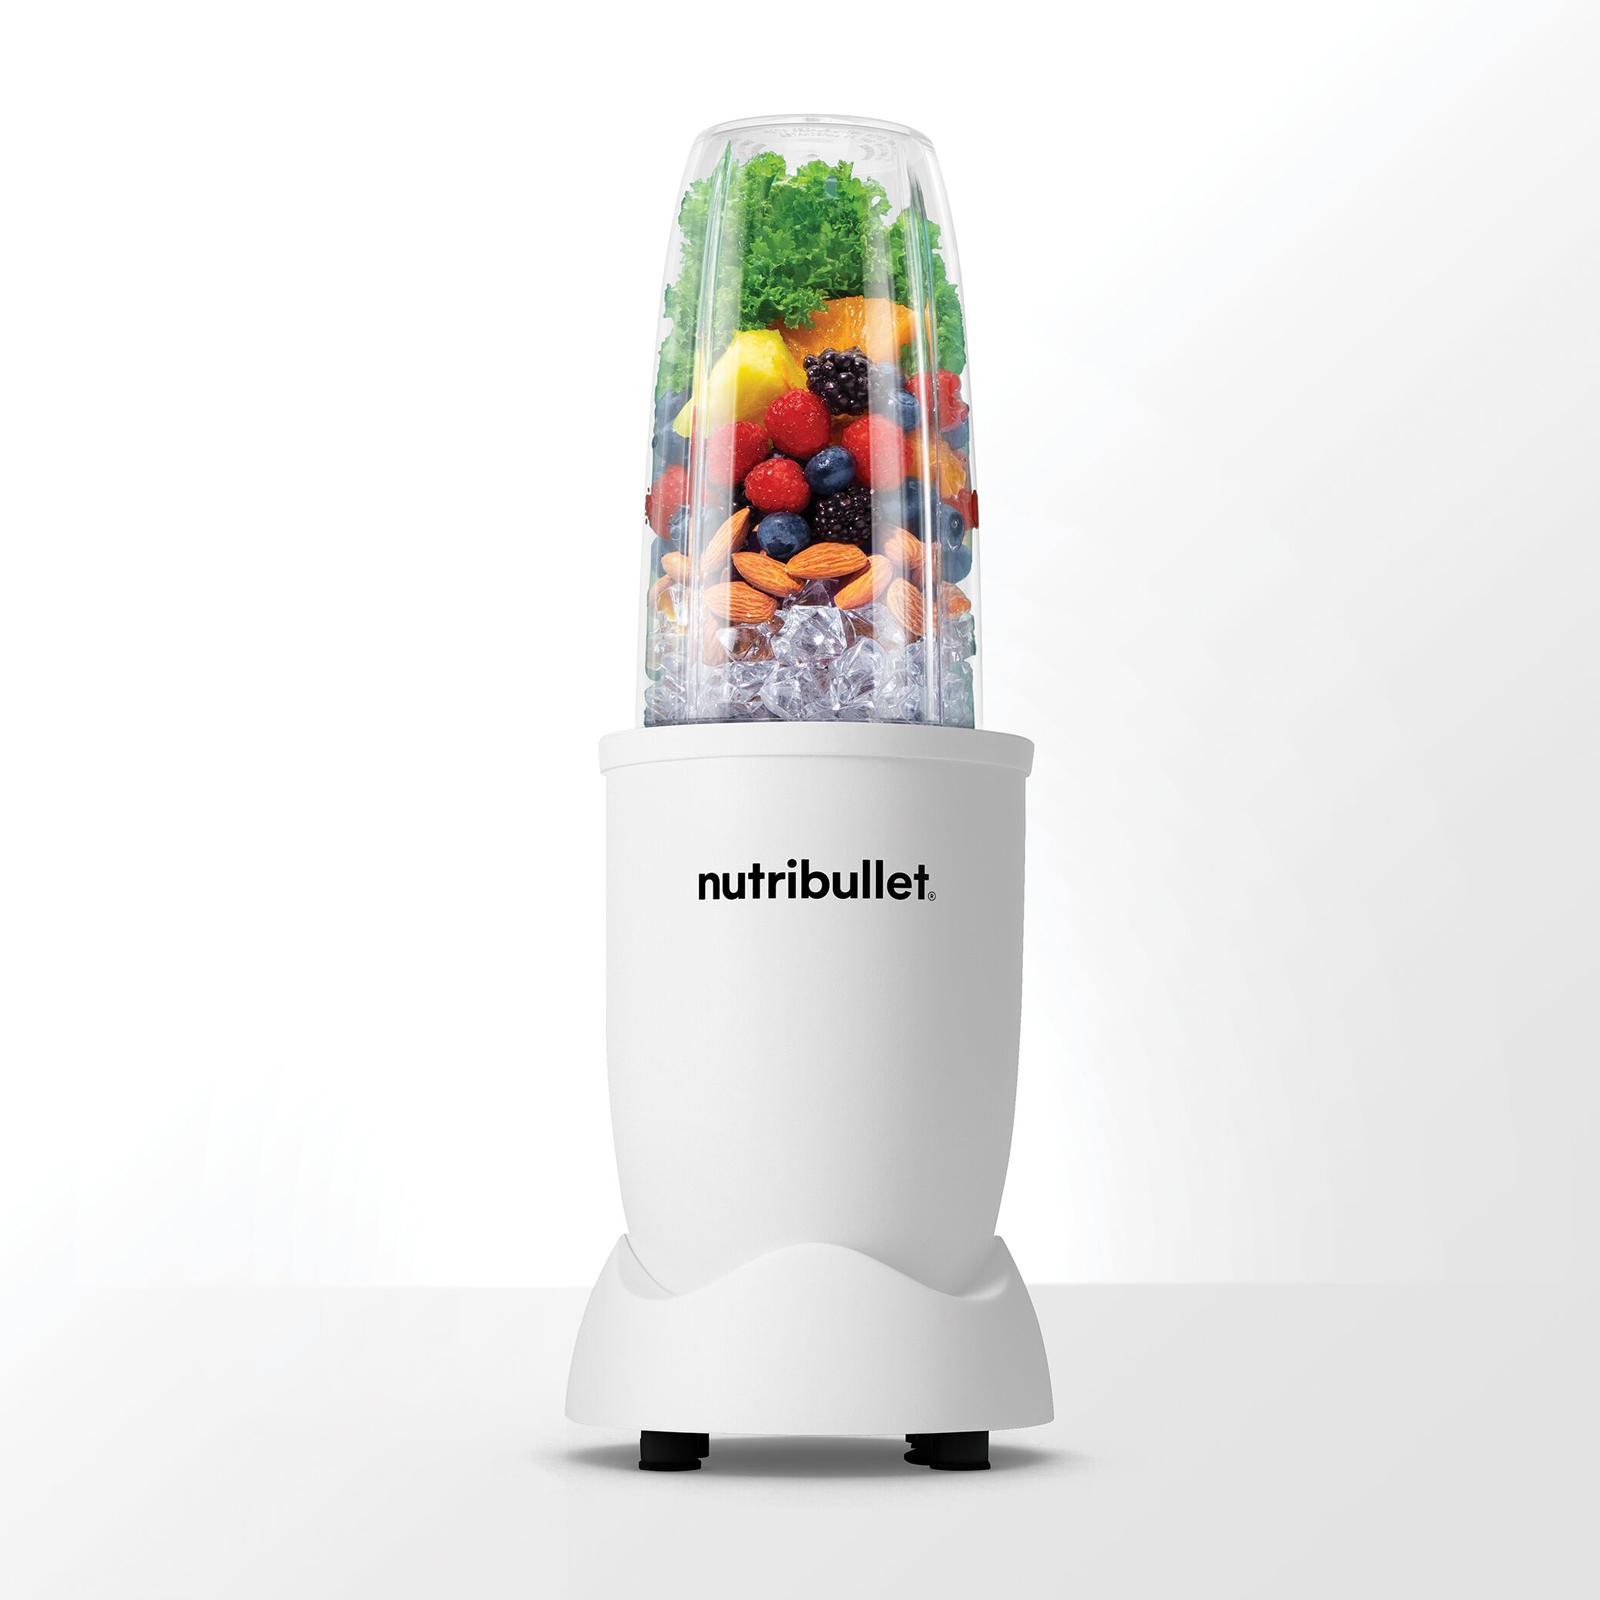 Soup and Smoothies: Nutribullet RX Review - All Nutribullet Recipes